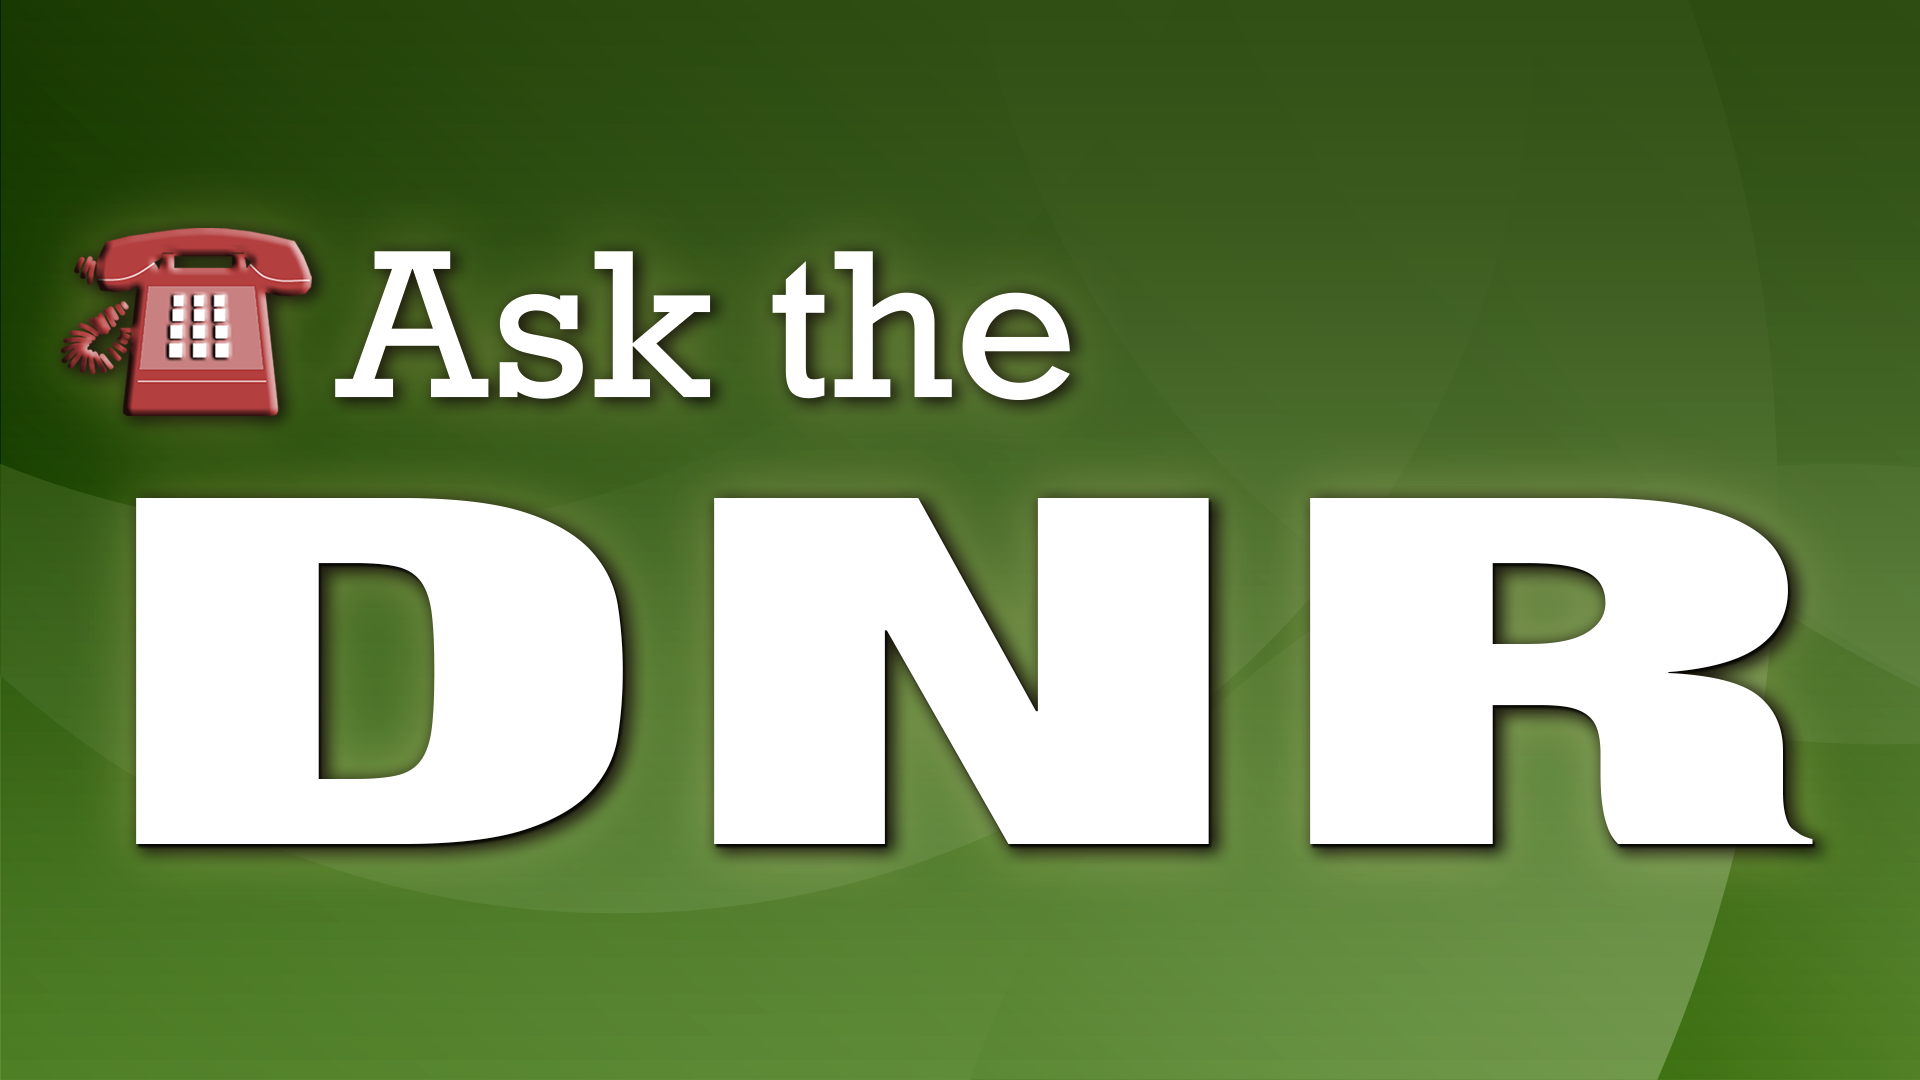 Ask the DNR